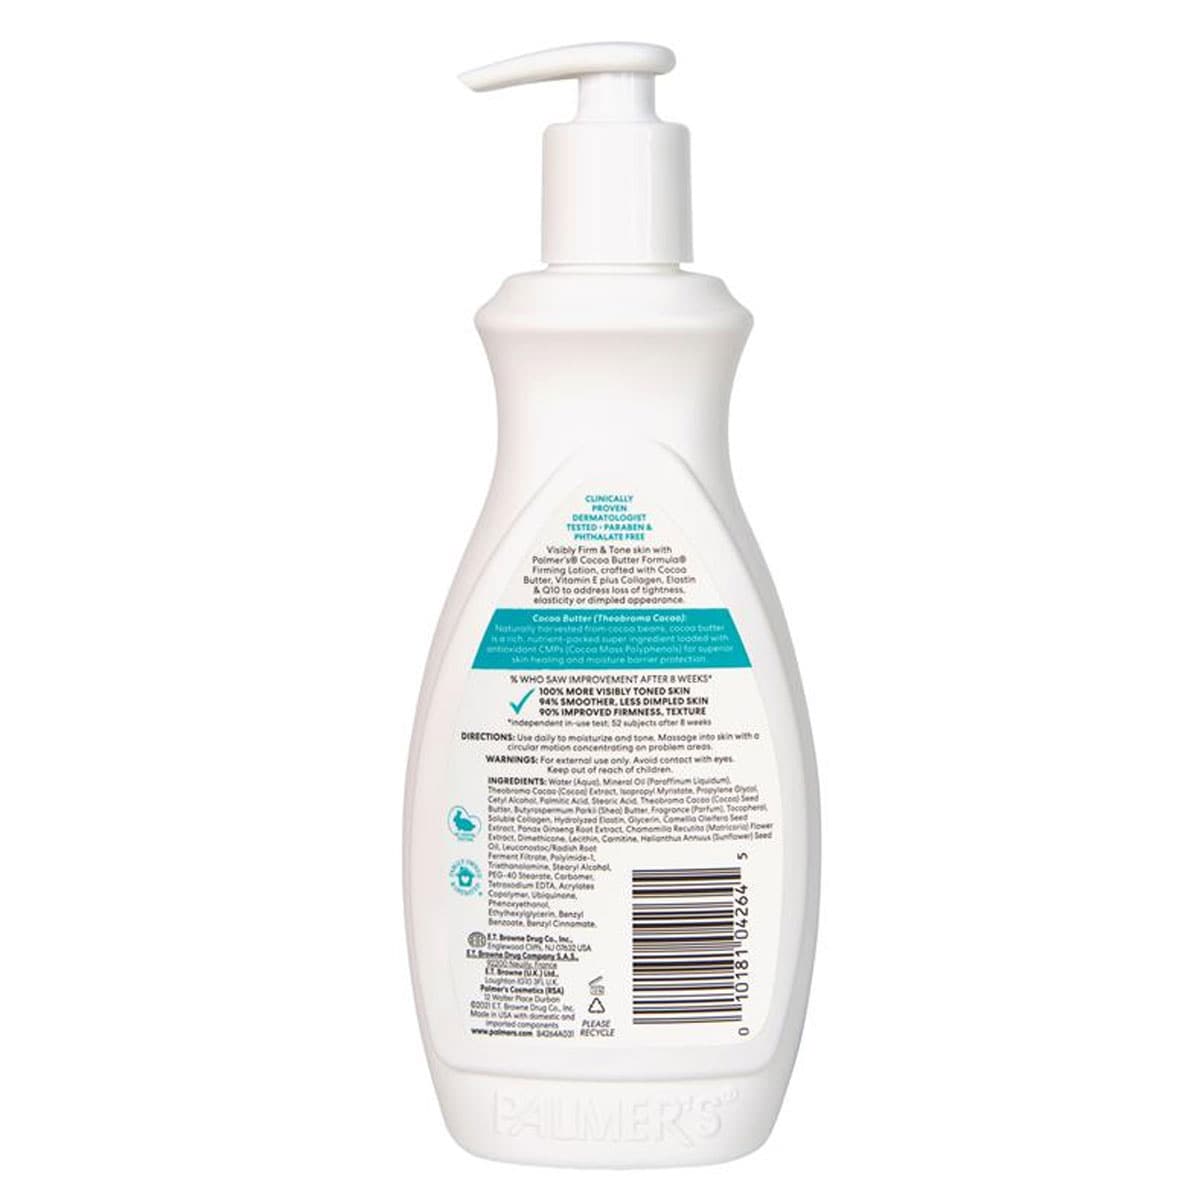 Palmers Cocoa Butter Firming Body Lotion 400ml